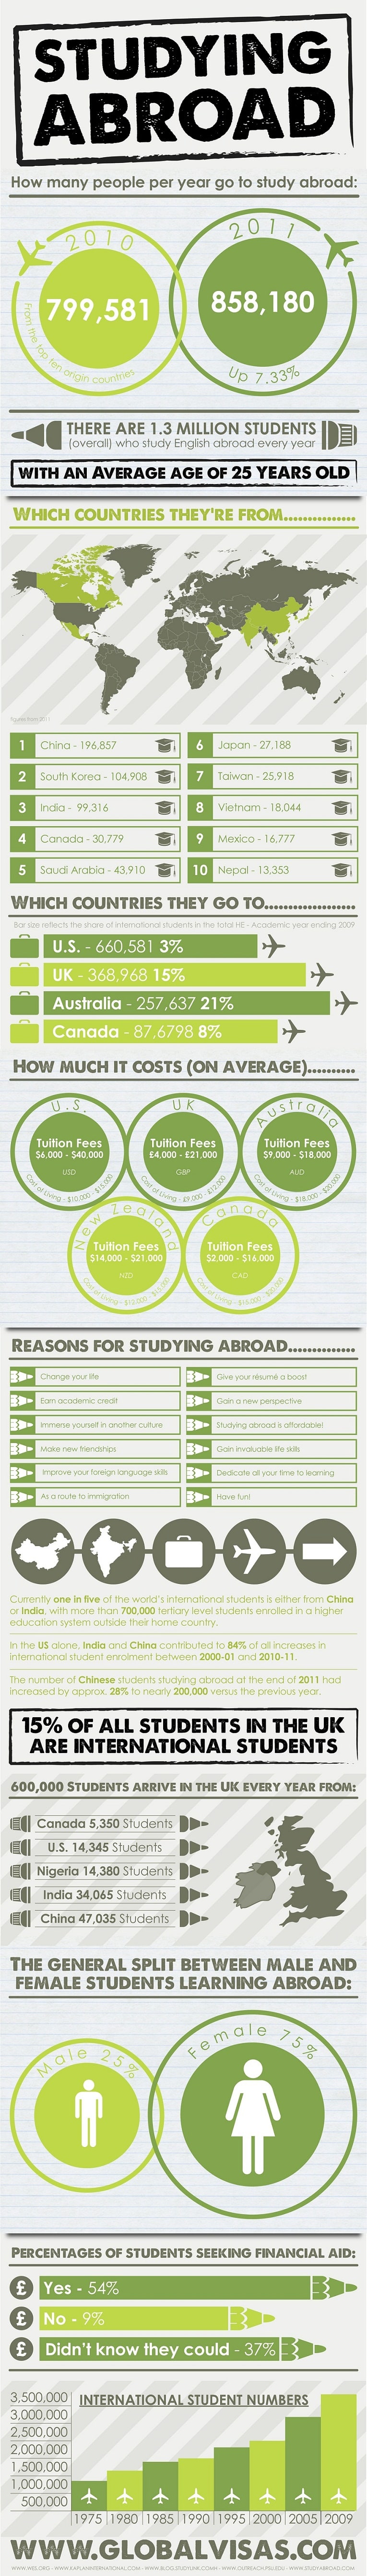 Global-Visas-Studying-Abroad-infographic